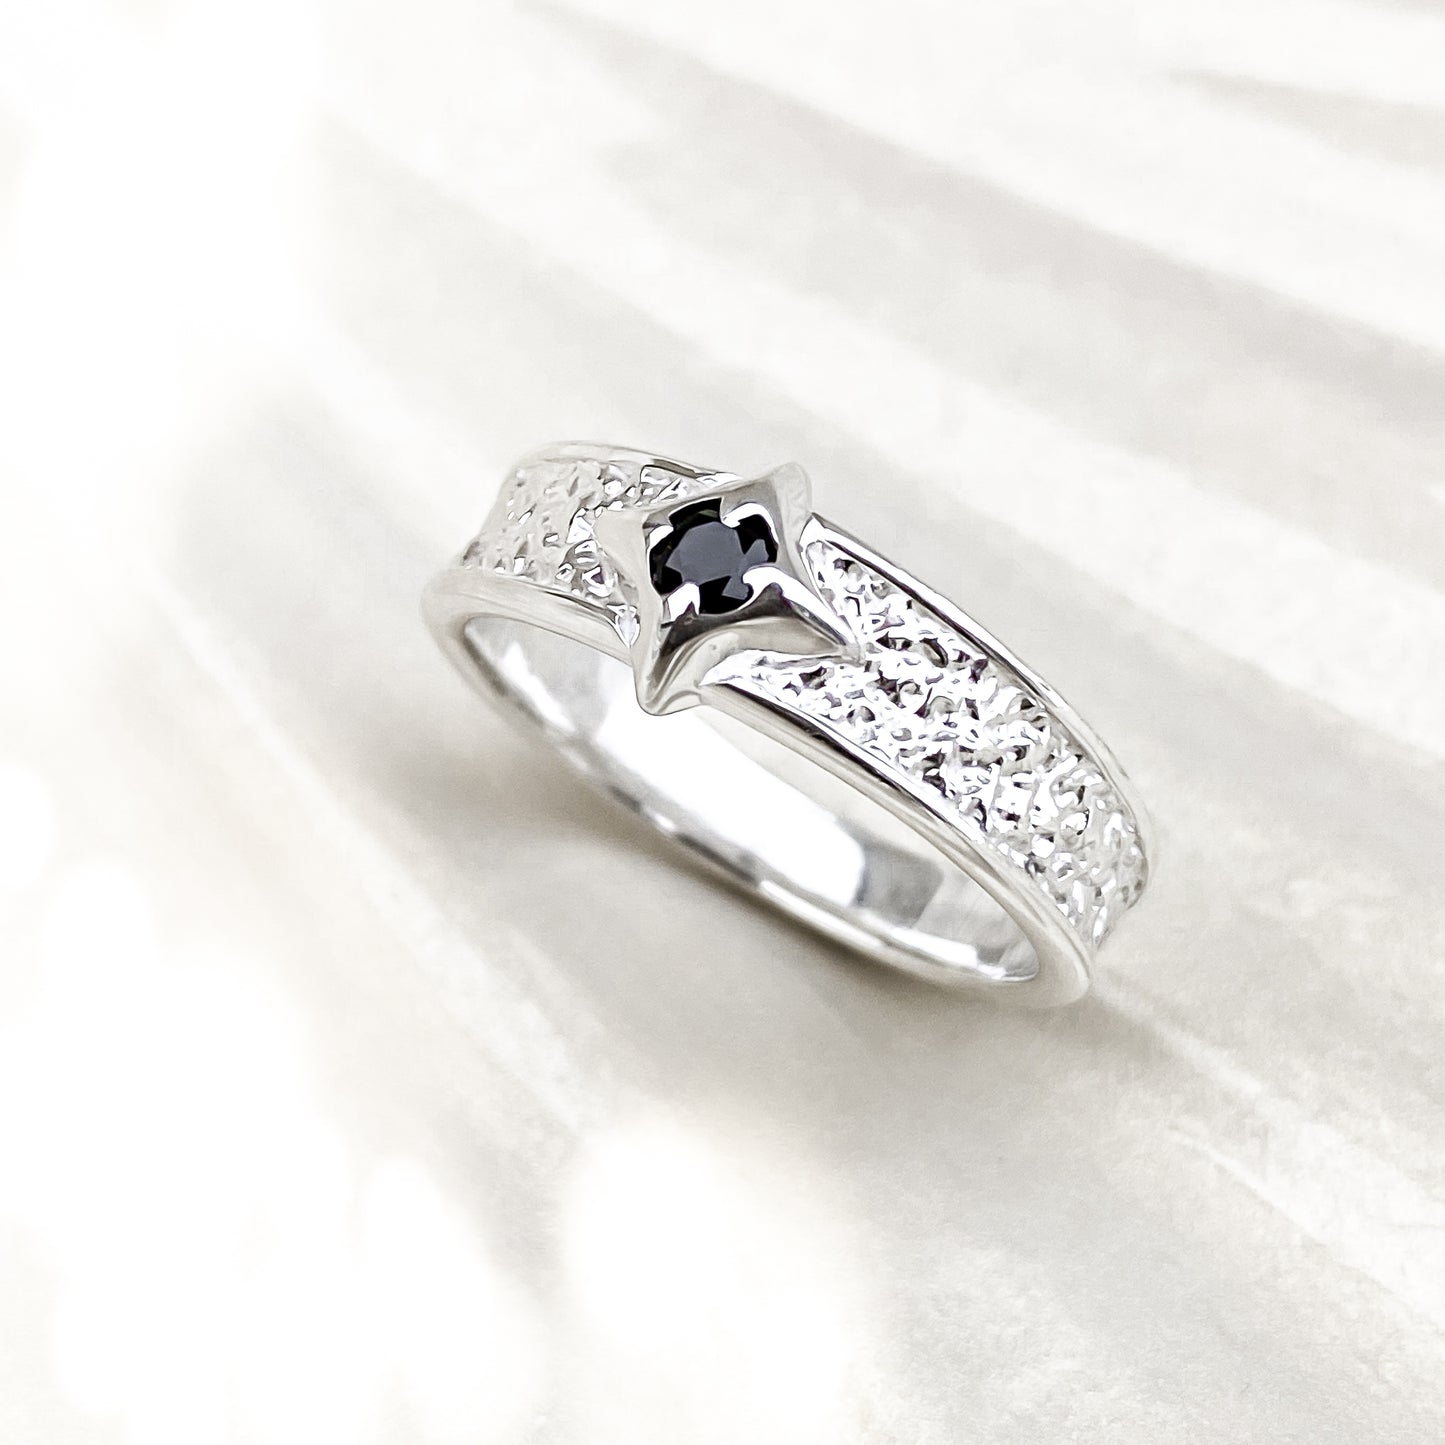 North Star Sterling Silver Ring with Black Spinel